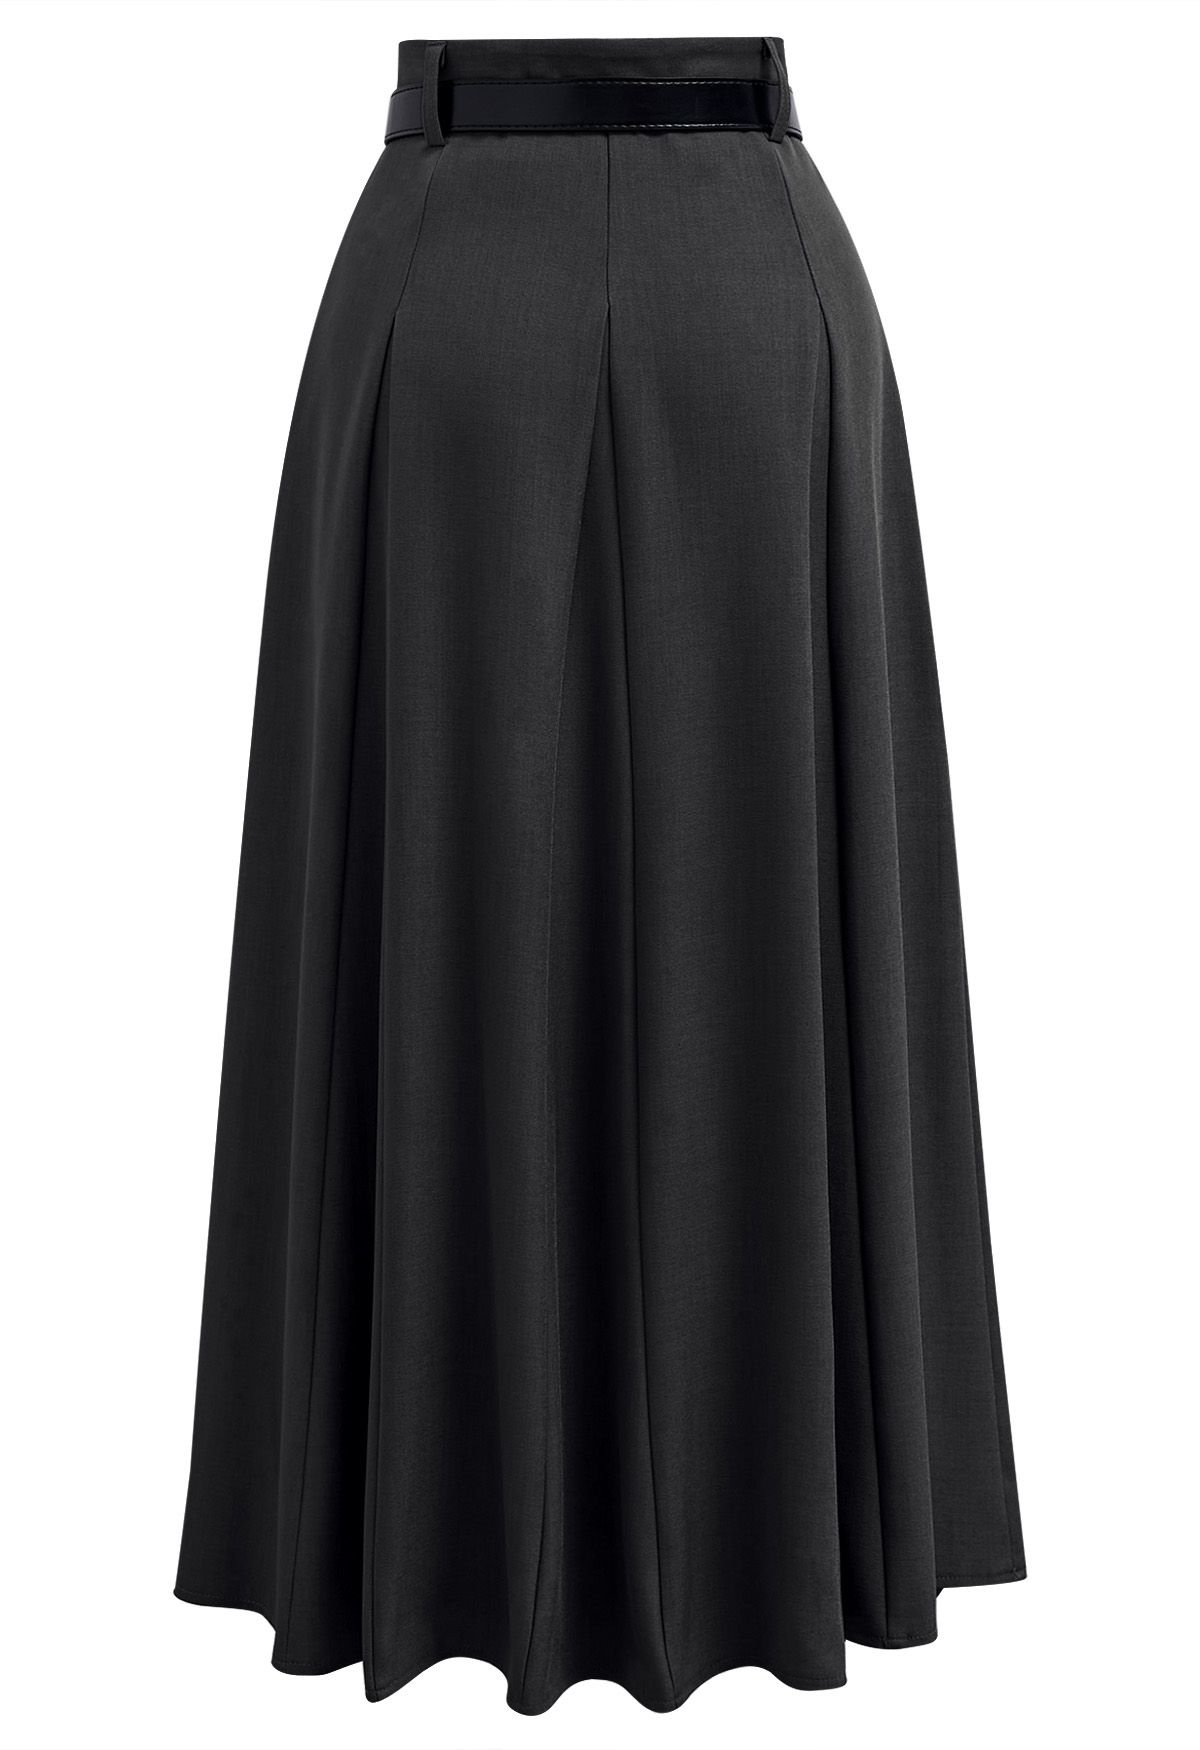 Chic Illusion Belted Flare Maxi Skirt in Black